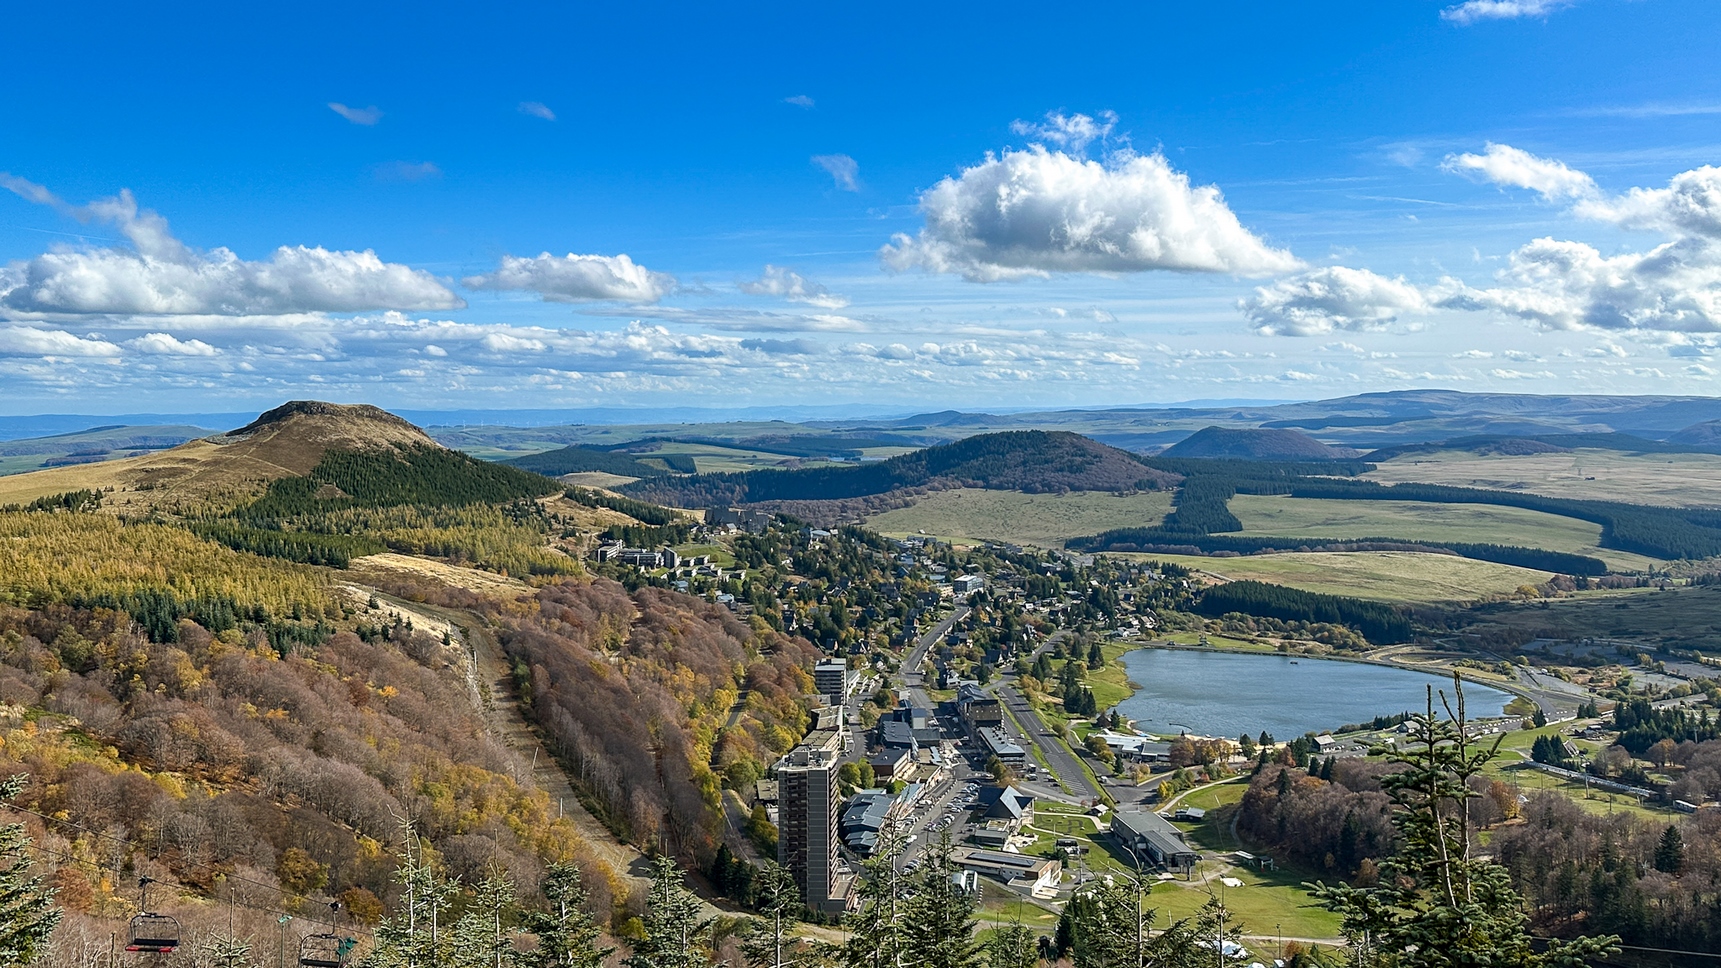 Zipline in Super Besse, view of Super Besse in Autumn and the Puy du Chambourguet